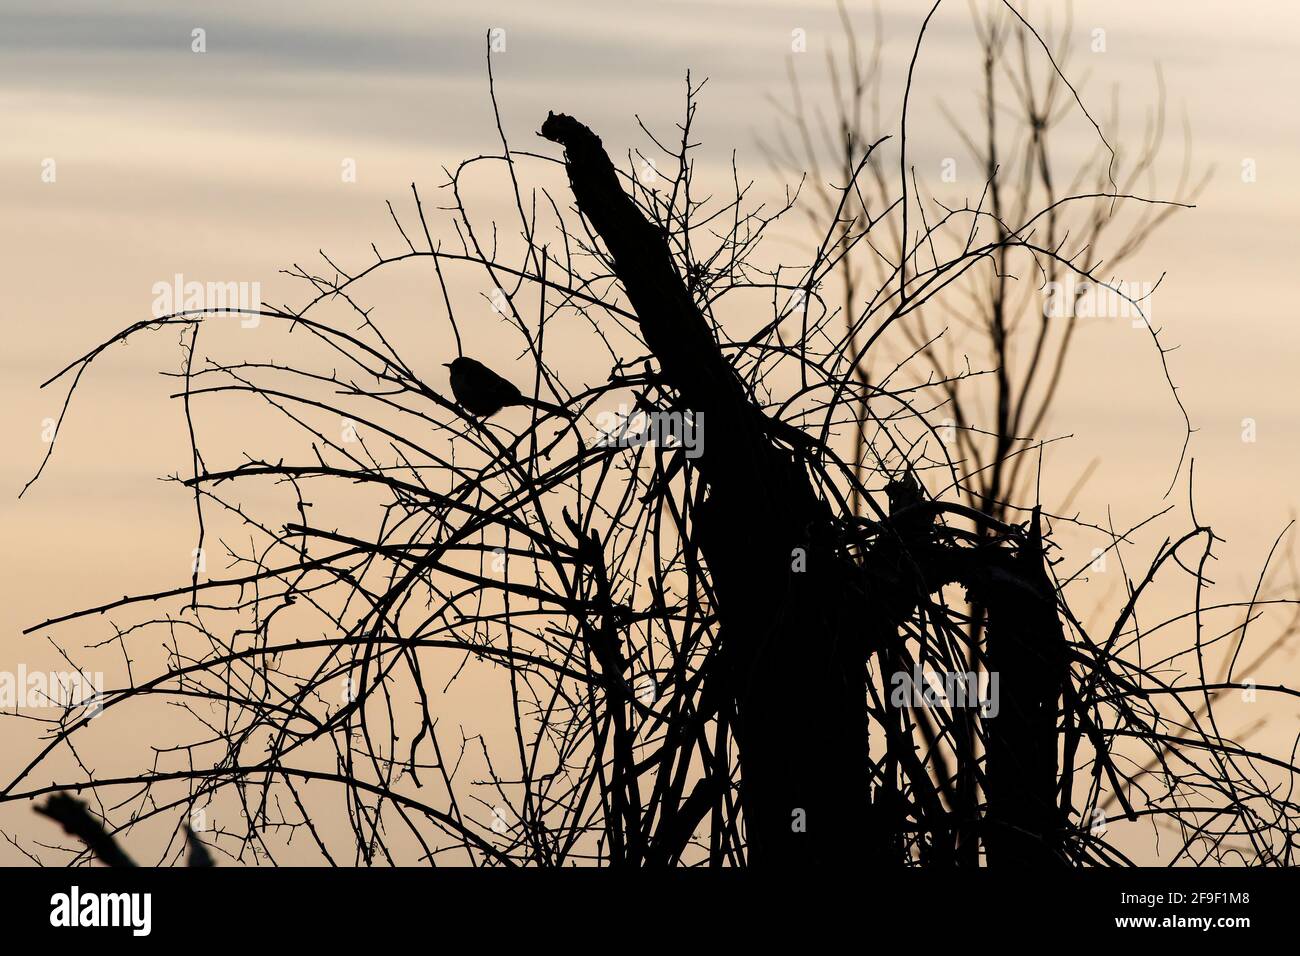 Songbird silhouette in tangled woody area Stock Photo